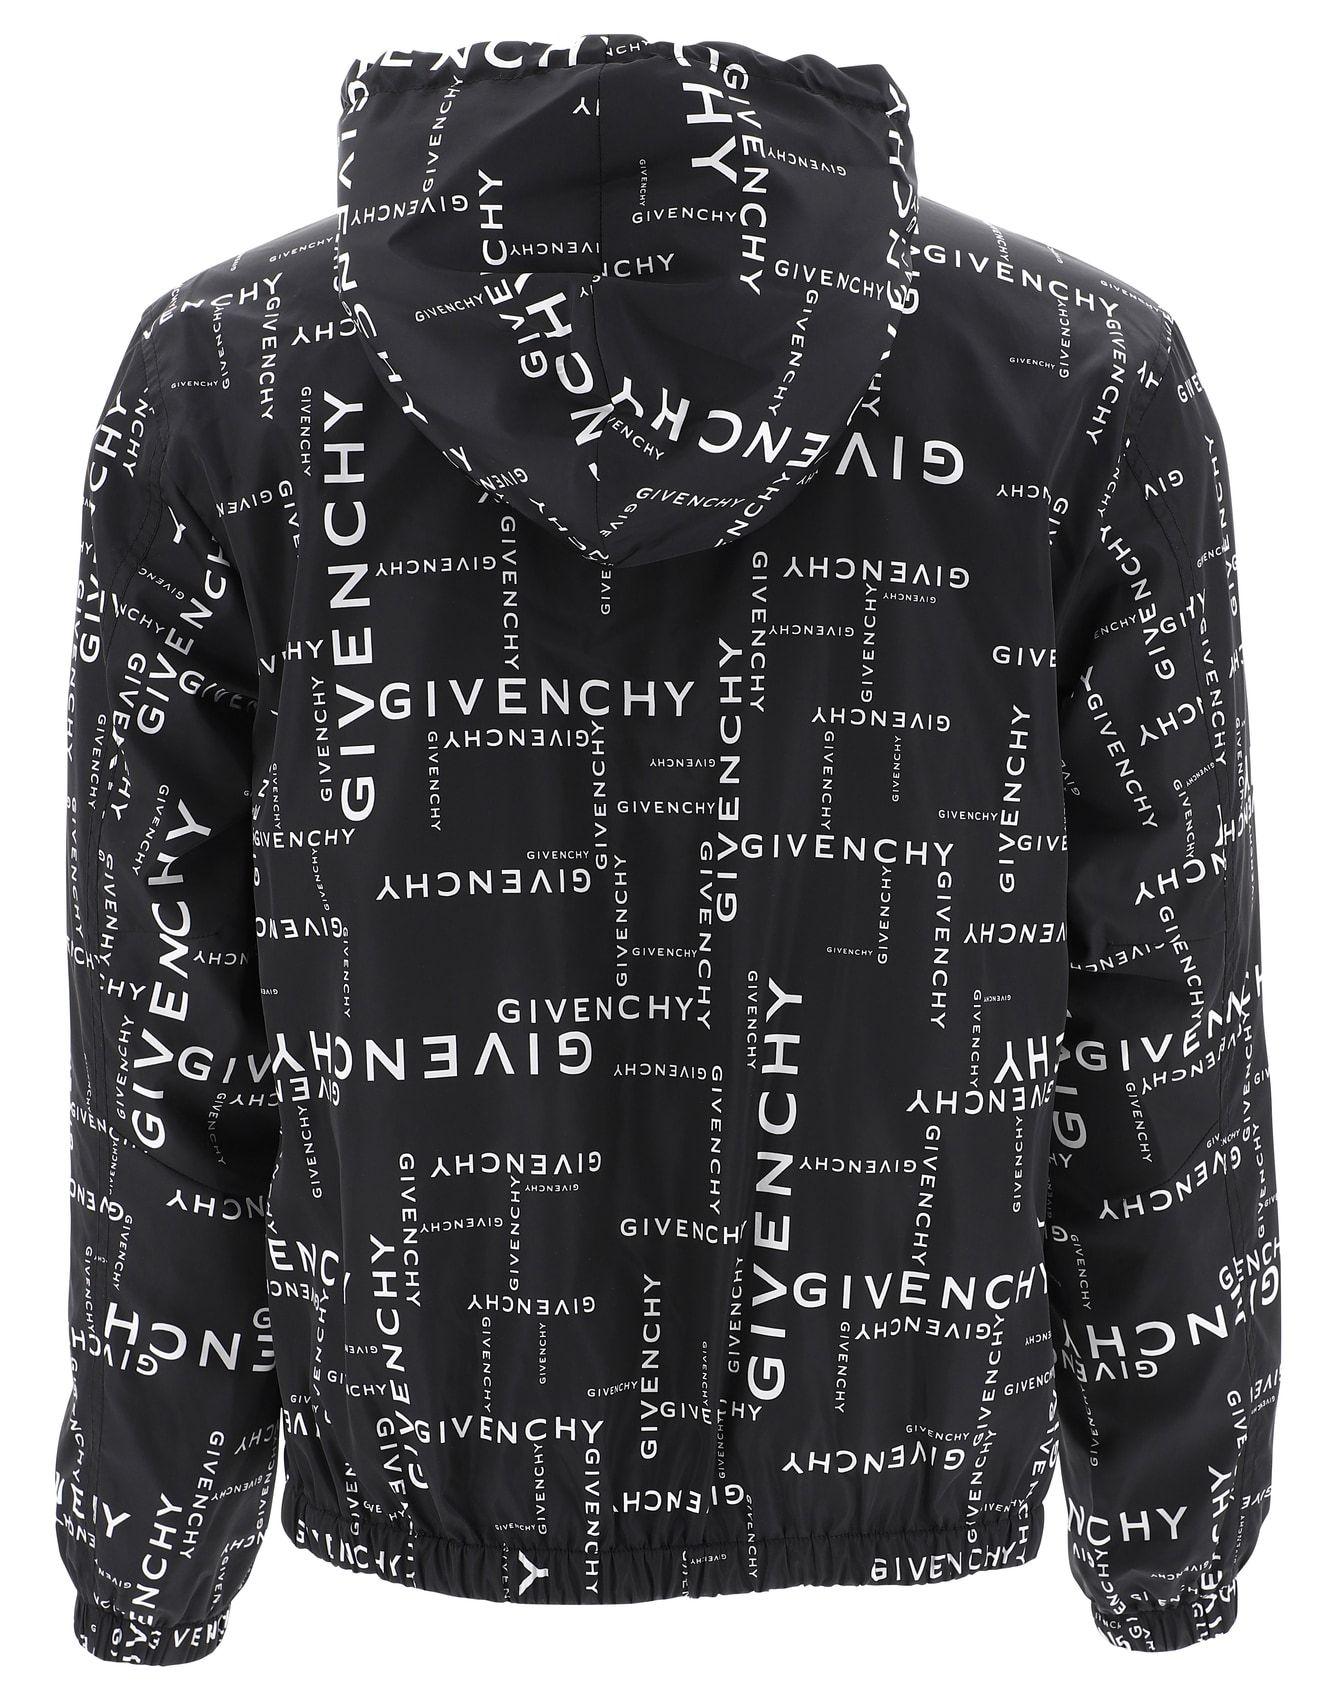 Givenchy Logo Print Lightweight Jacket Fw19 in Black for Men - Lyst